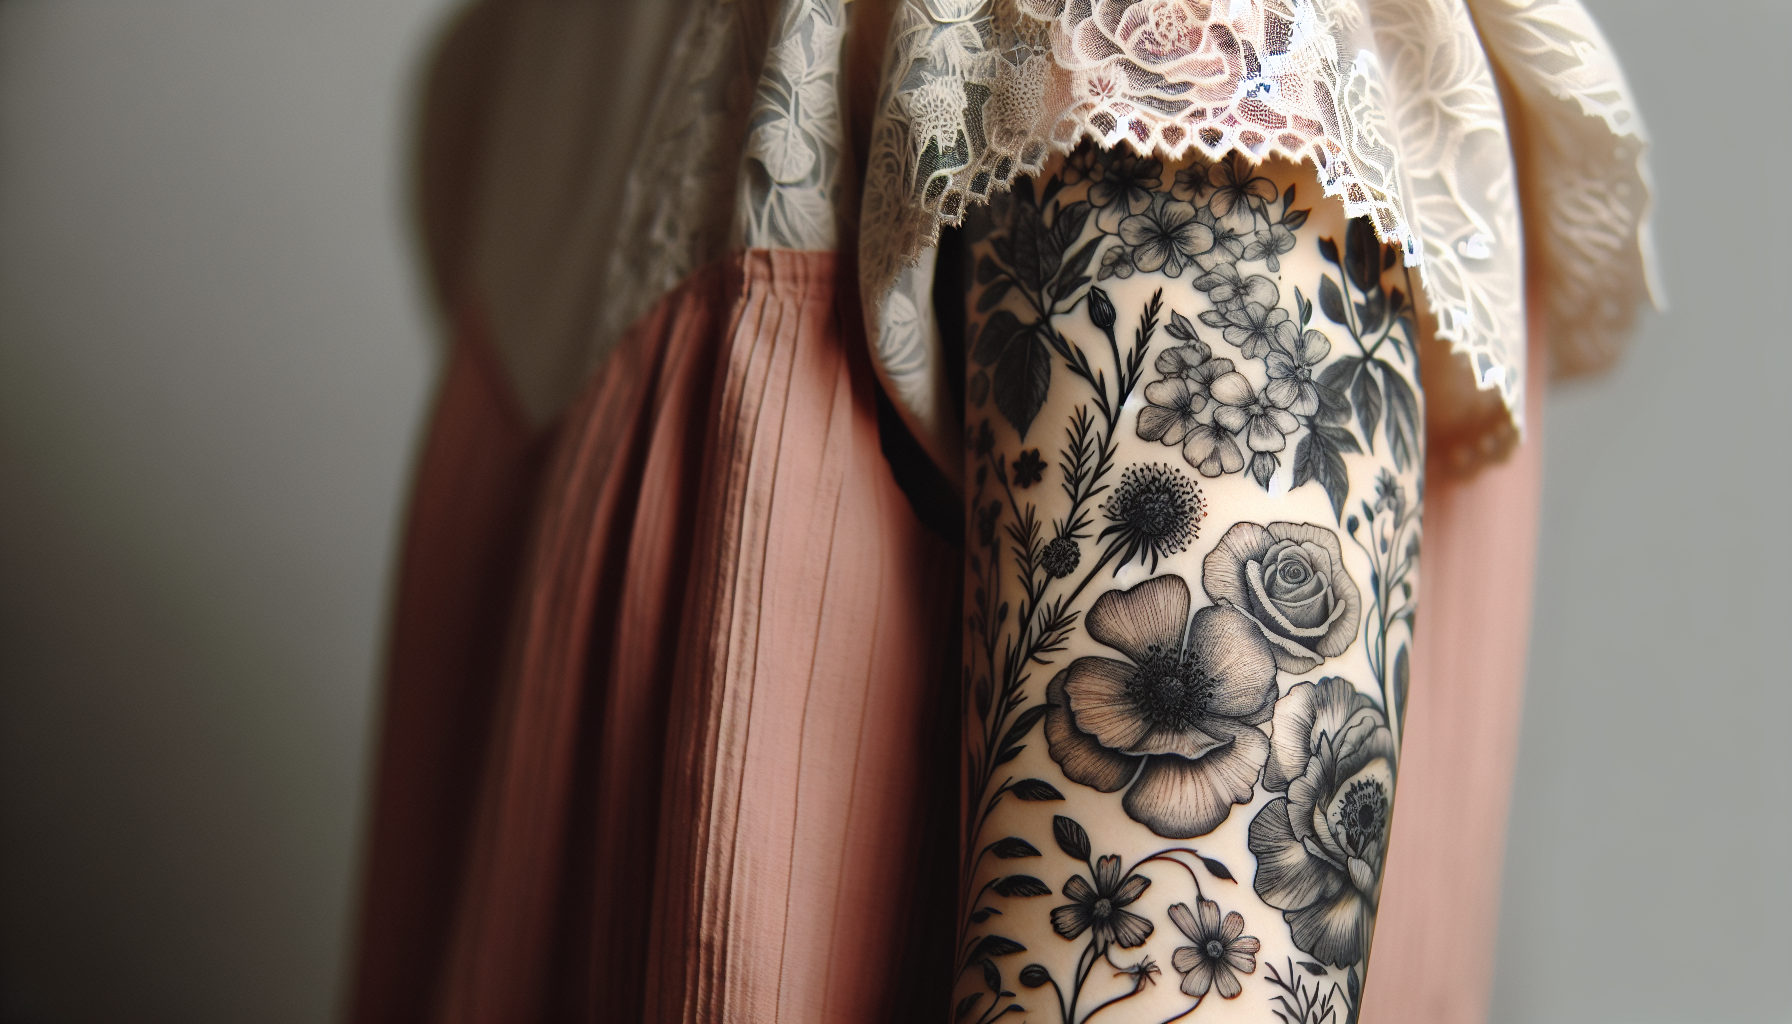 Various feminine floral tattoos including roses, wildflowers, and cherry blossoms